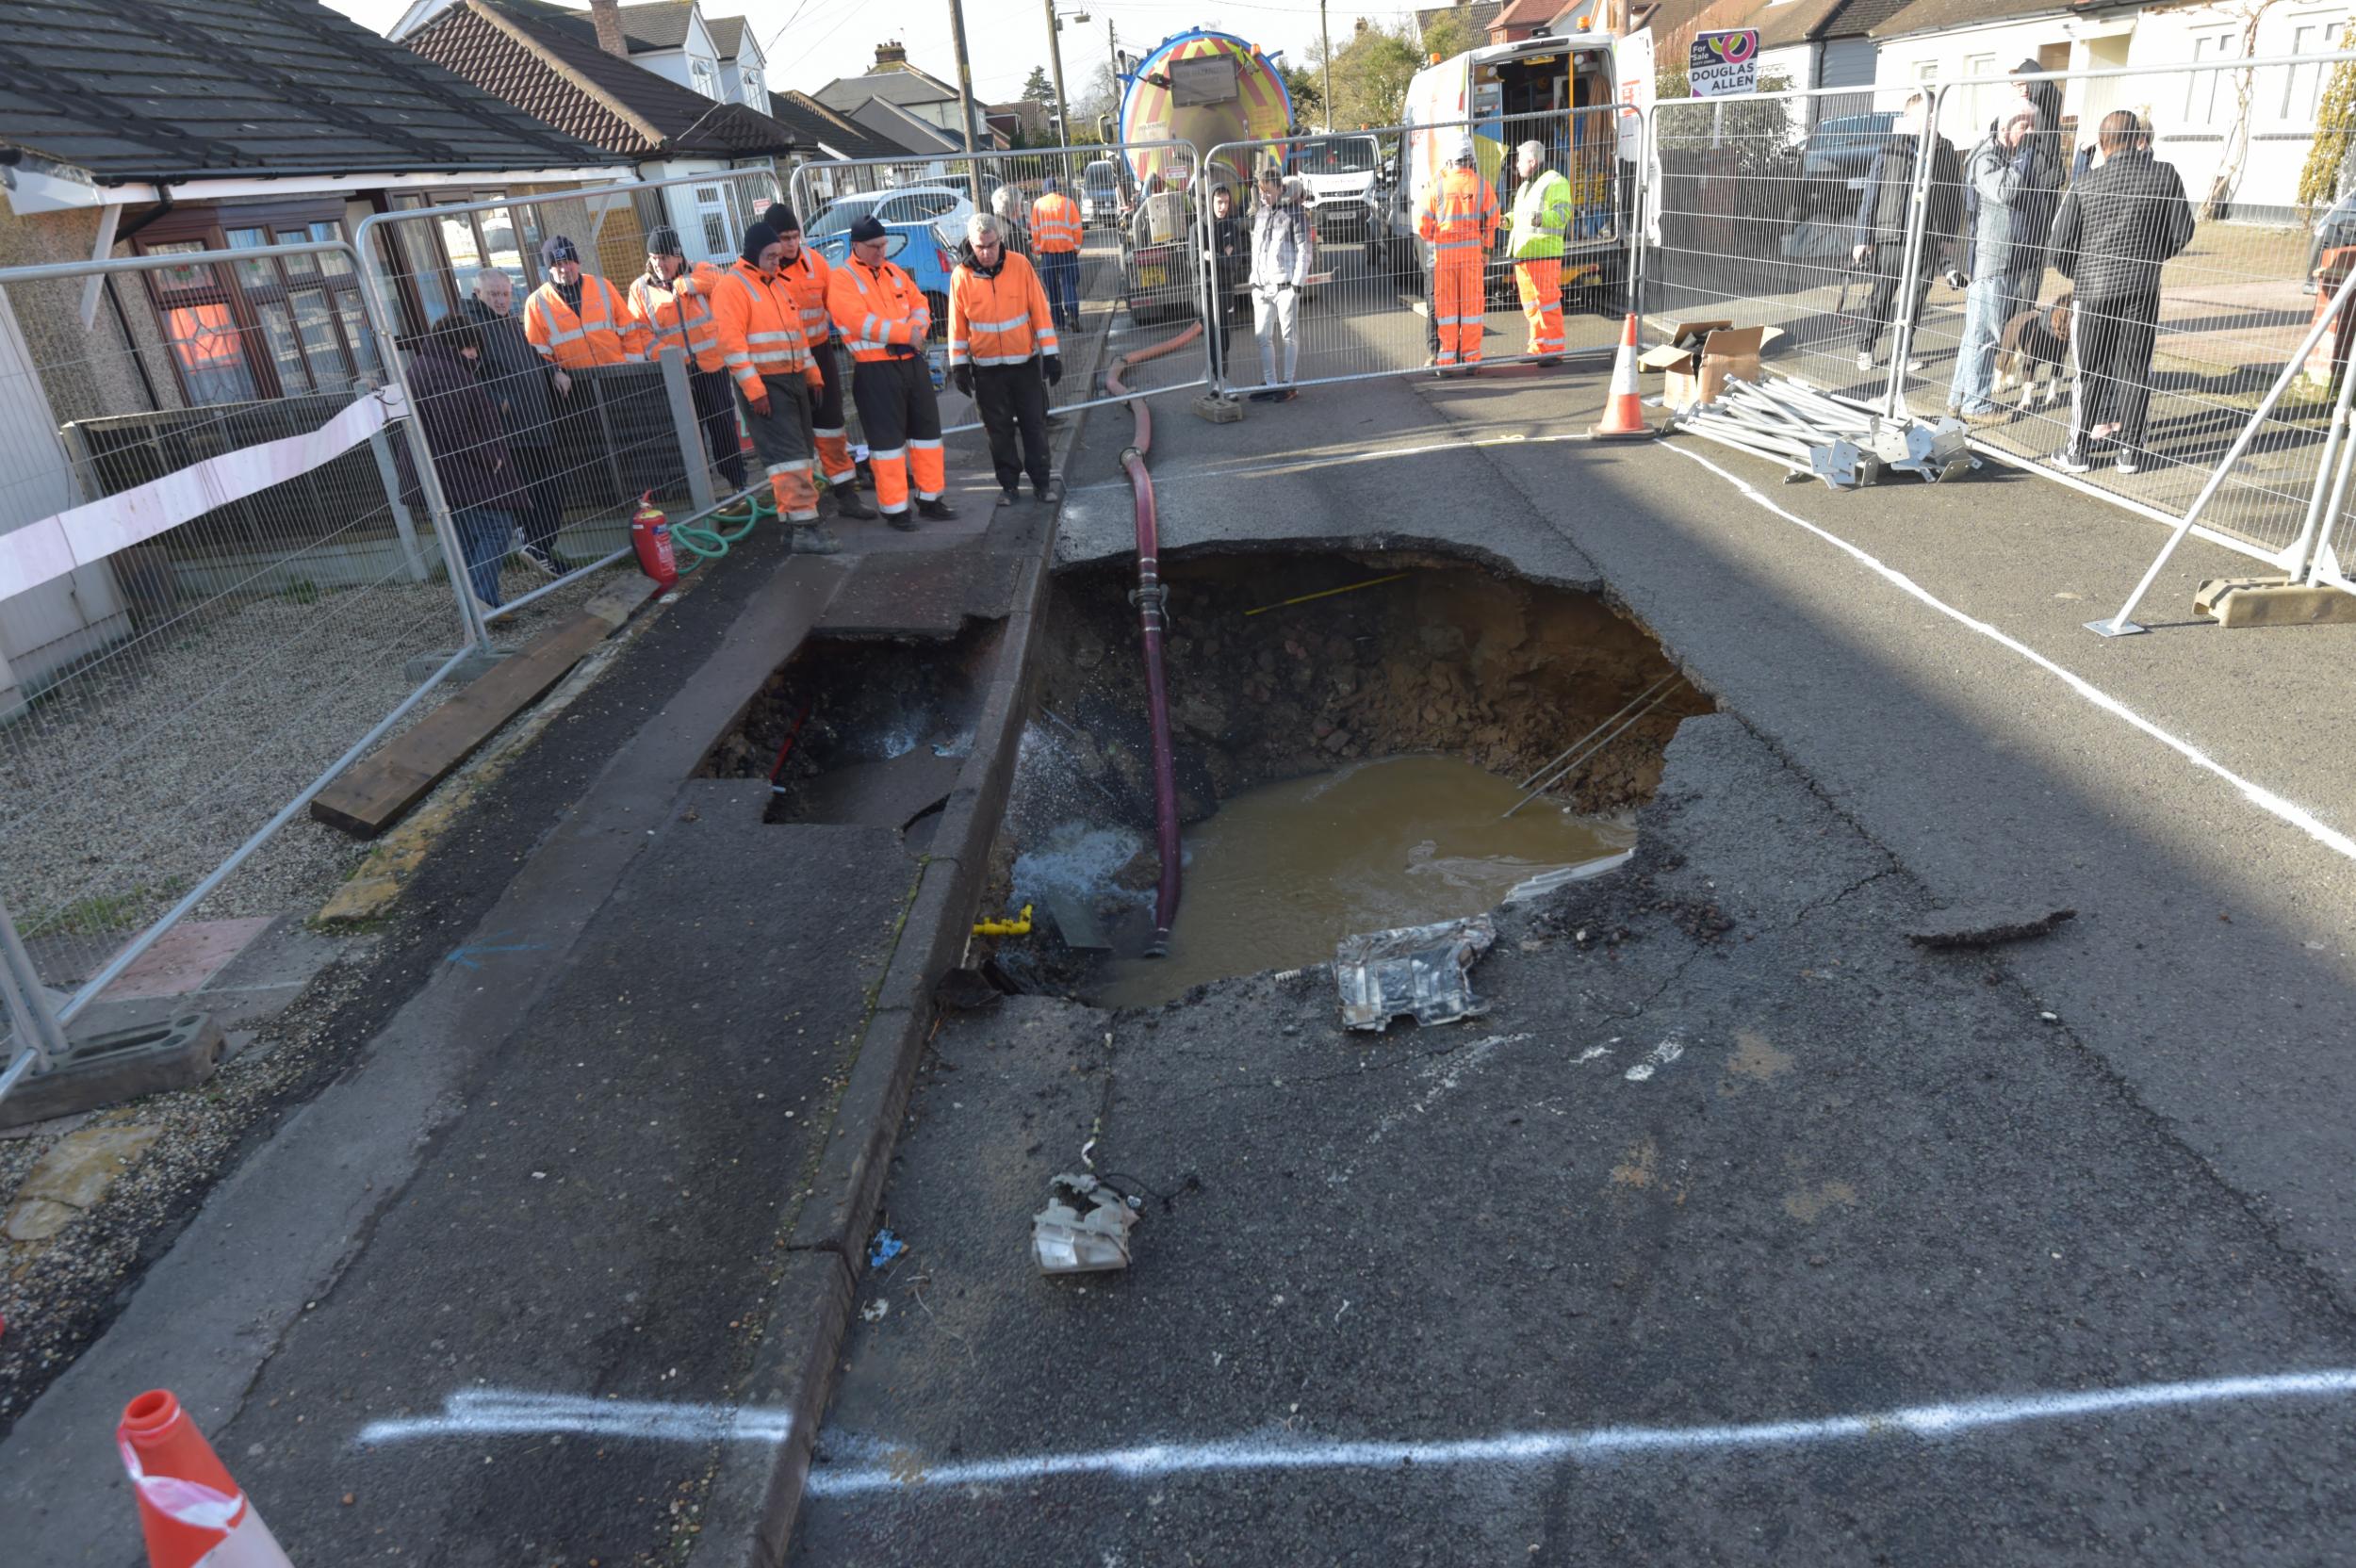 A sinkhole in Brentwood, Essex, following the removal of a car which became trapped in it overnight.